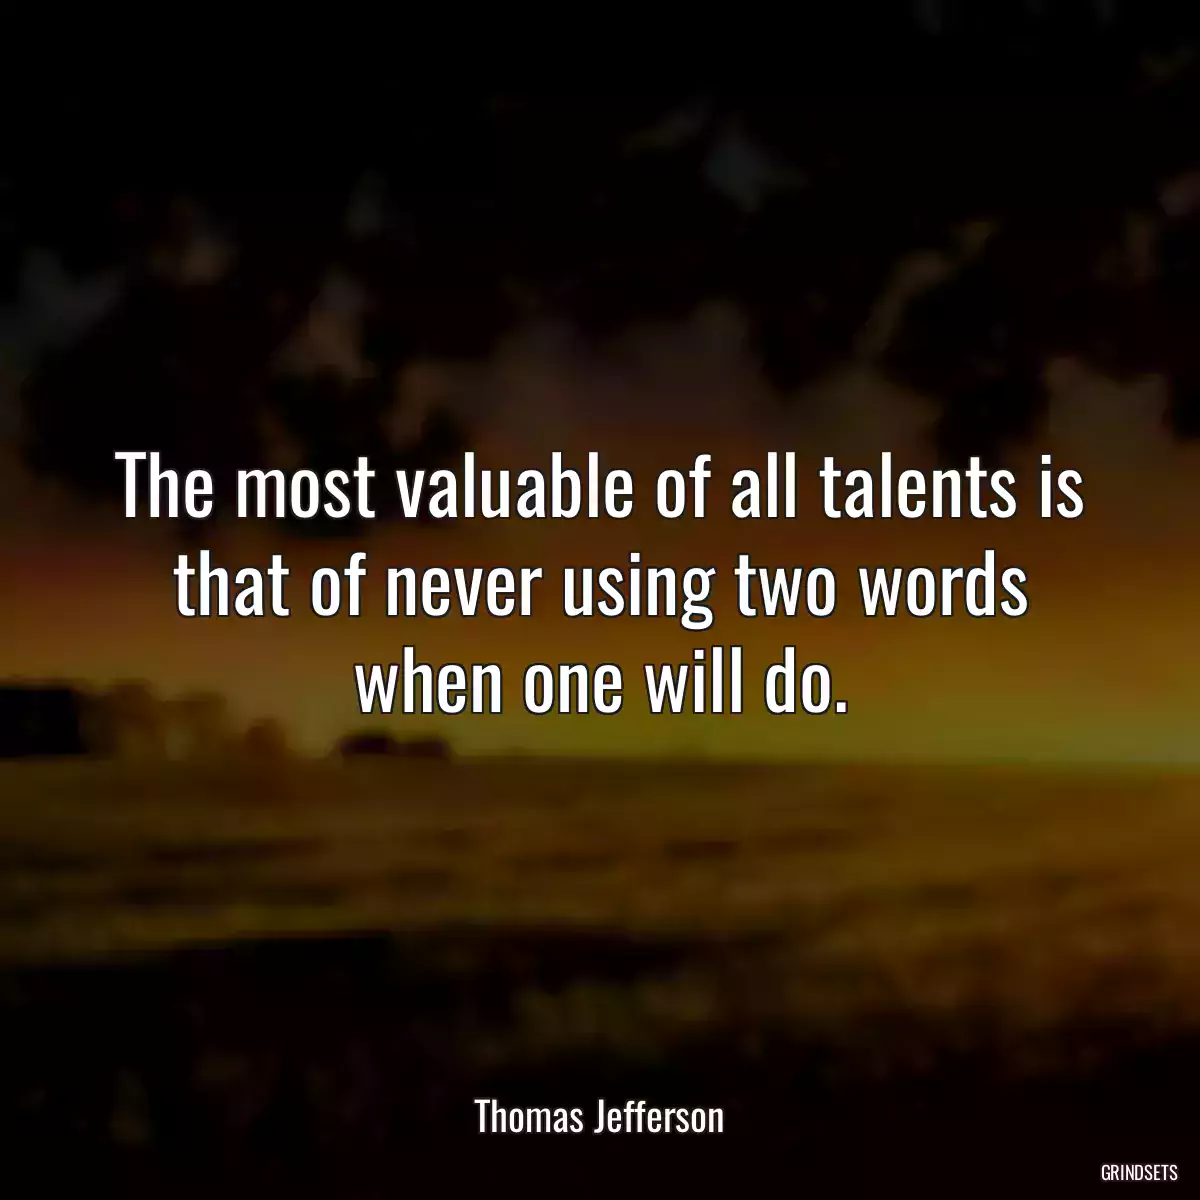 The most valuable of all talents is that of never using two words when one will do.